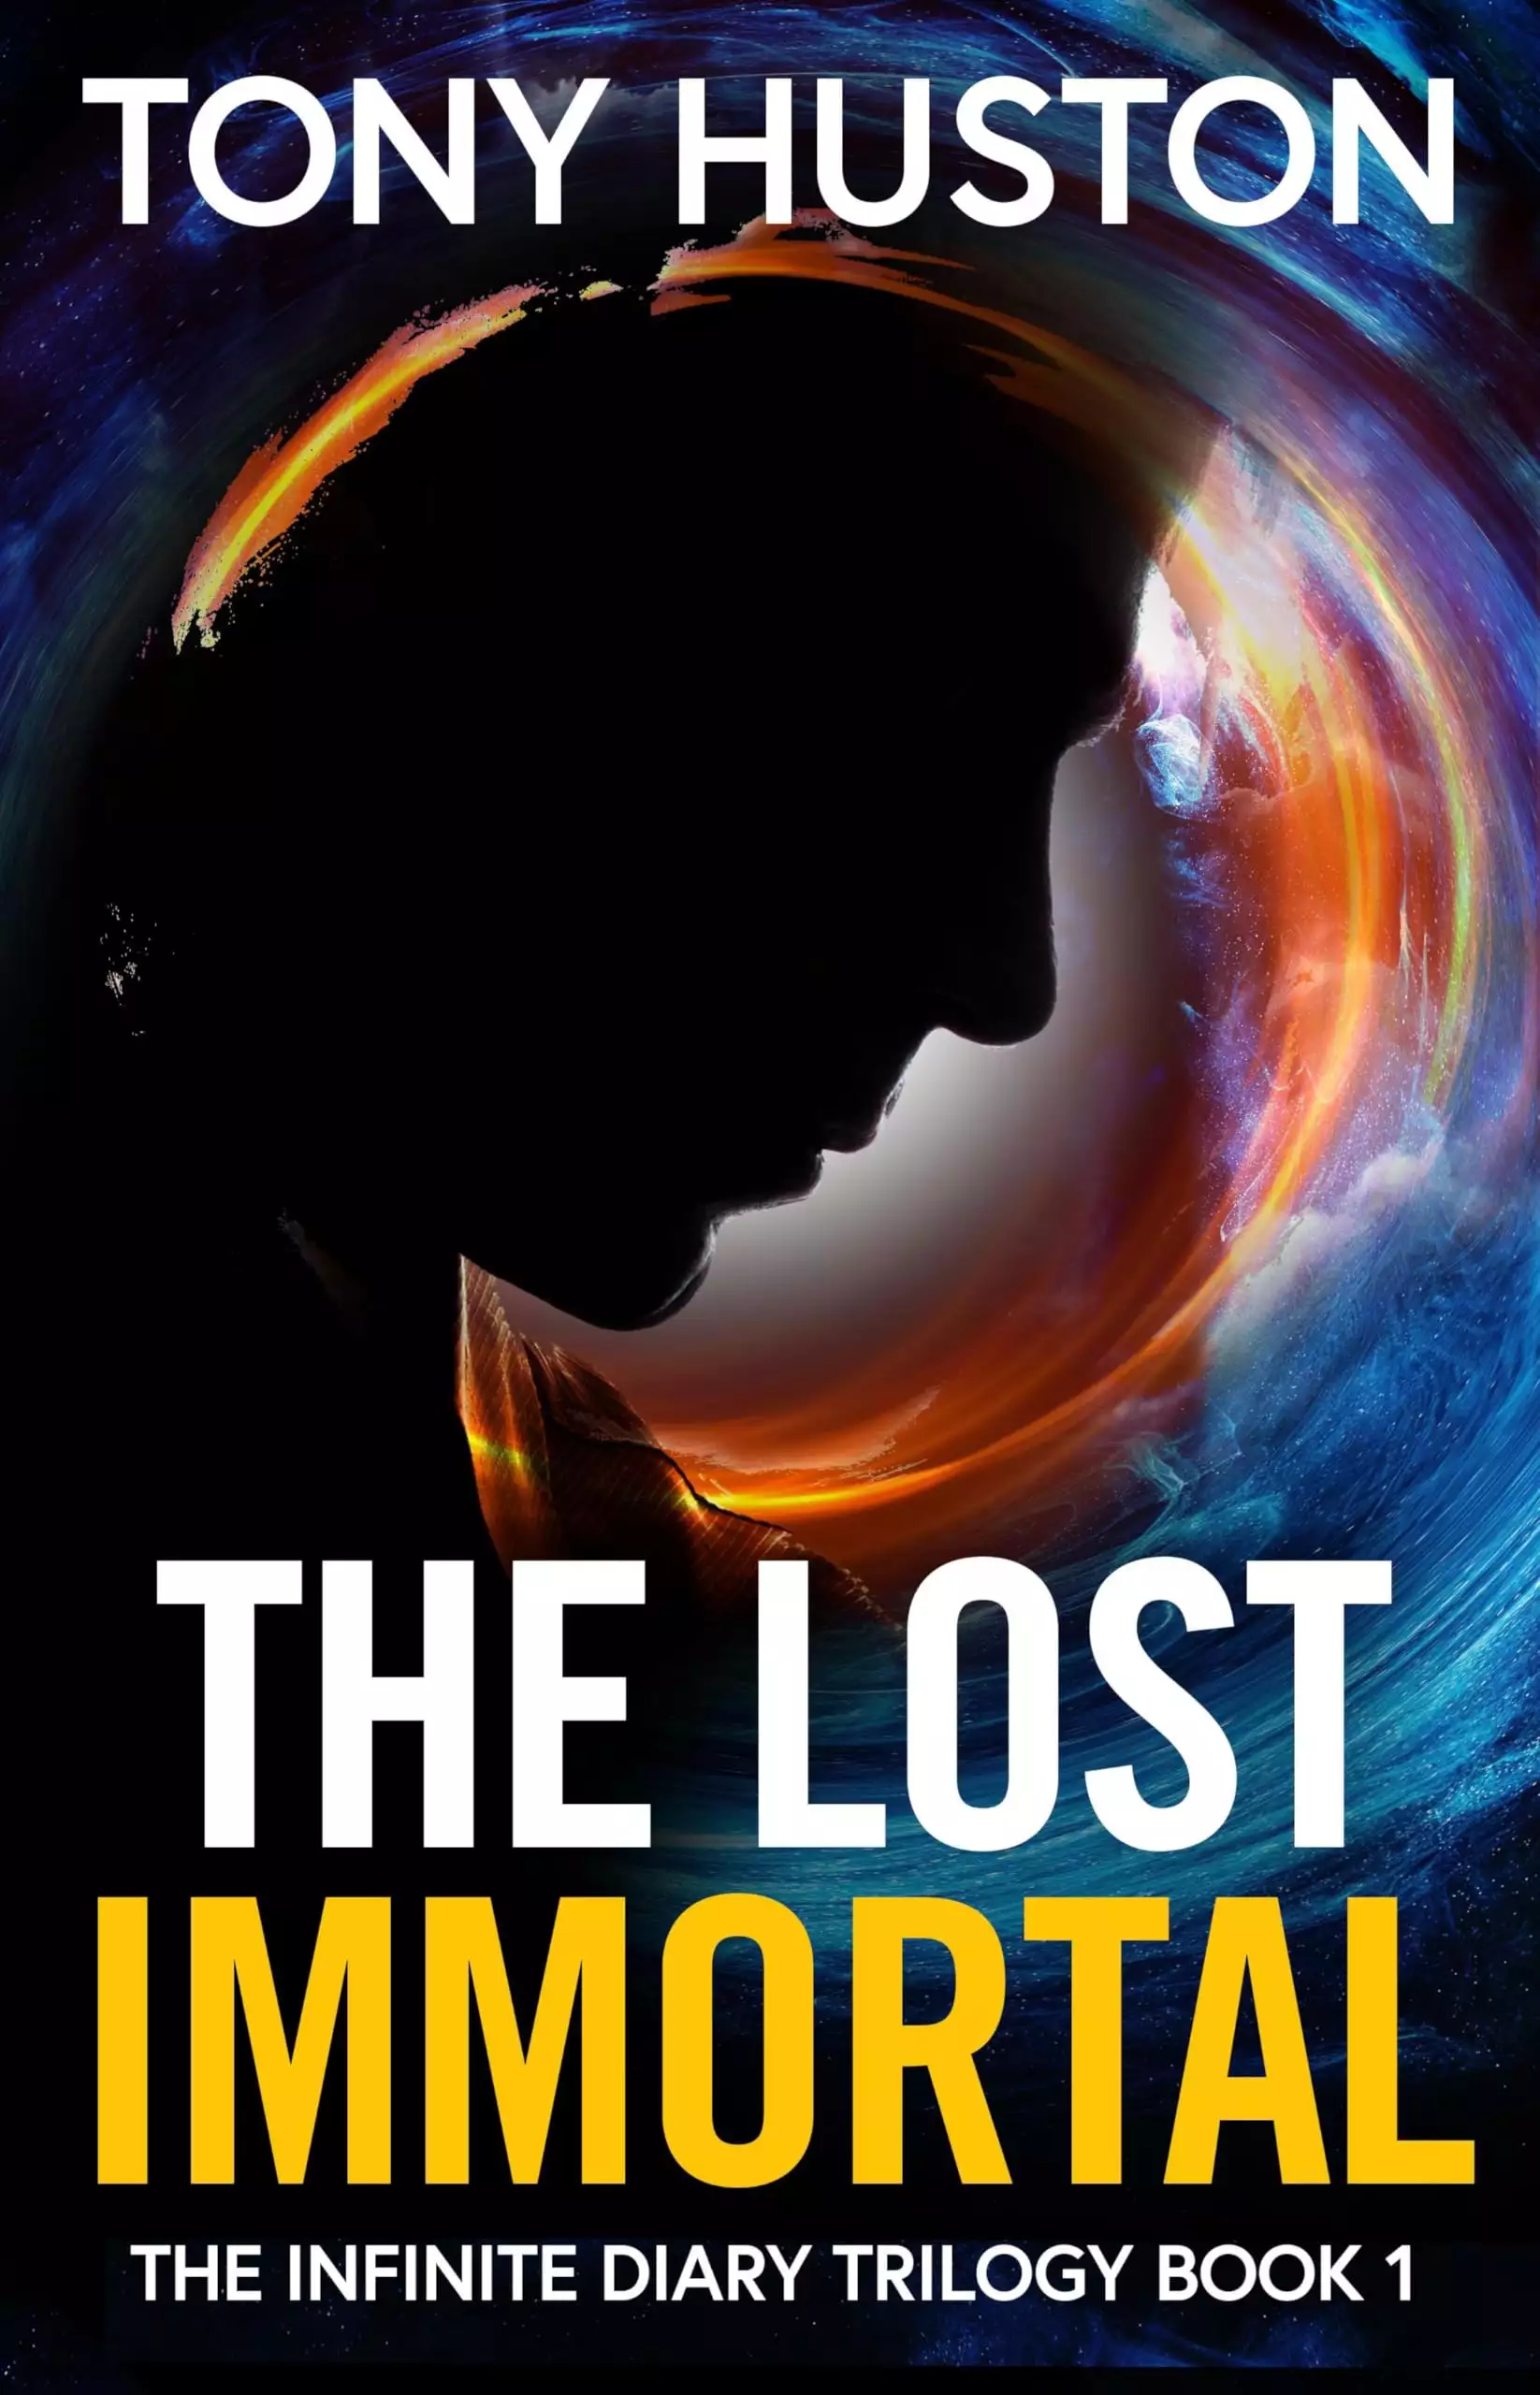 The Lost Immortal: The Infinite Diary Trilogy Book1